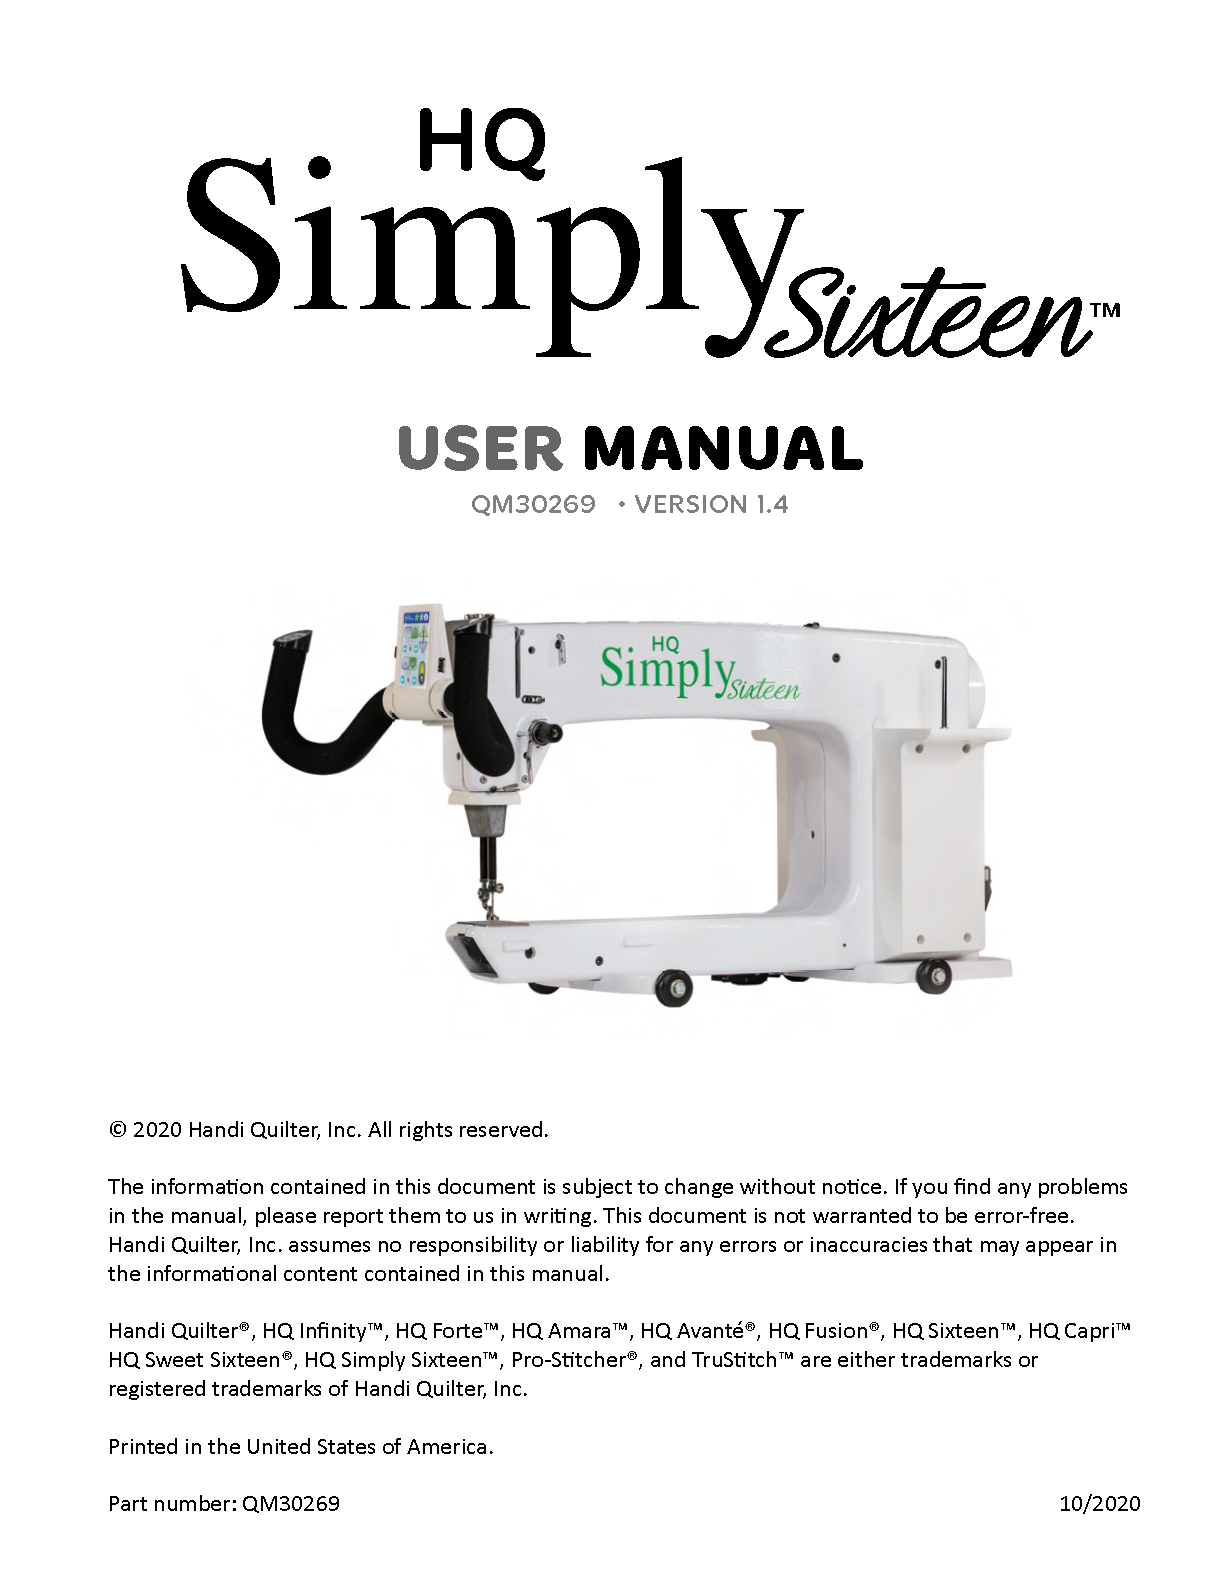 HQ-Simply-Sixteen-User-Manual_ALL_web-1_Page_02.png